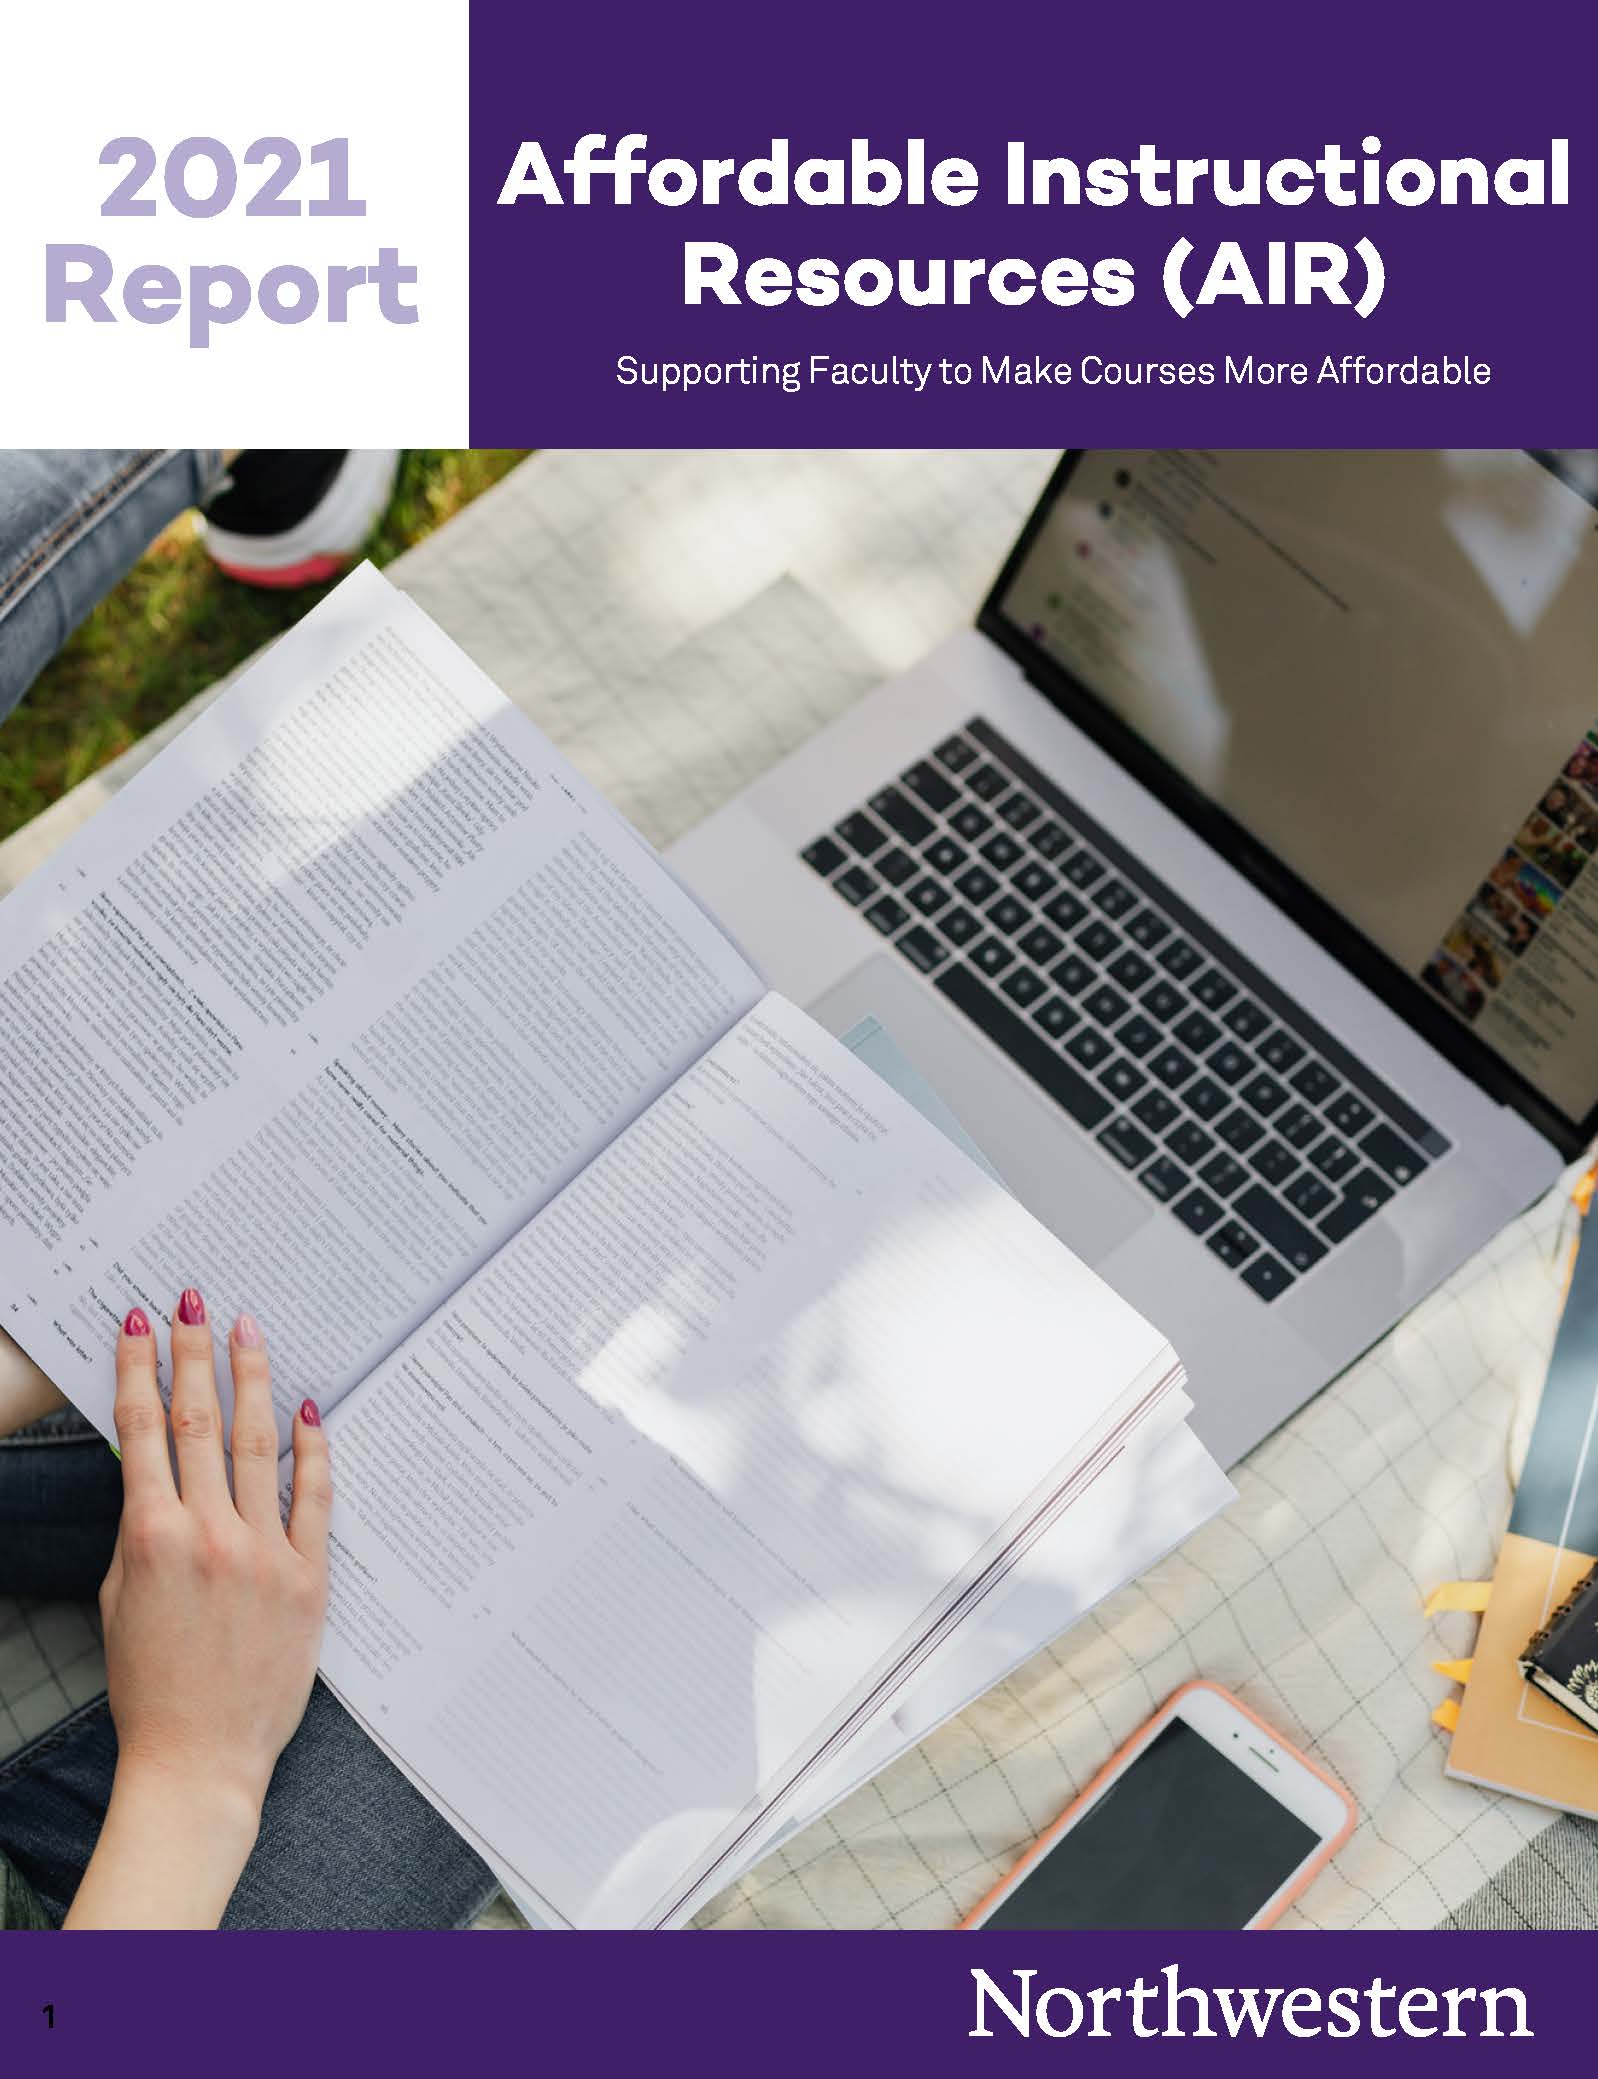 A report with a cover that reads "2021 Report: Affordable Instructional Resources (AIR): Supporting Faculty to Make Courses More Affordable"